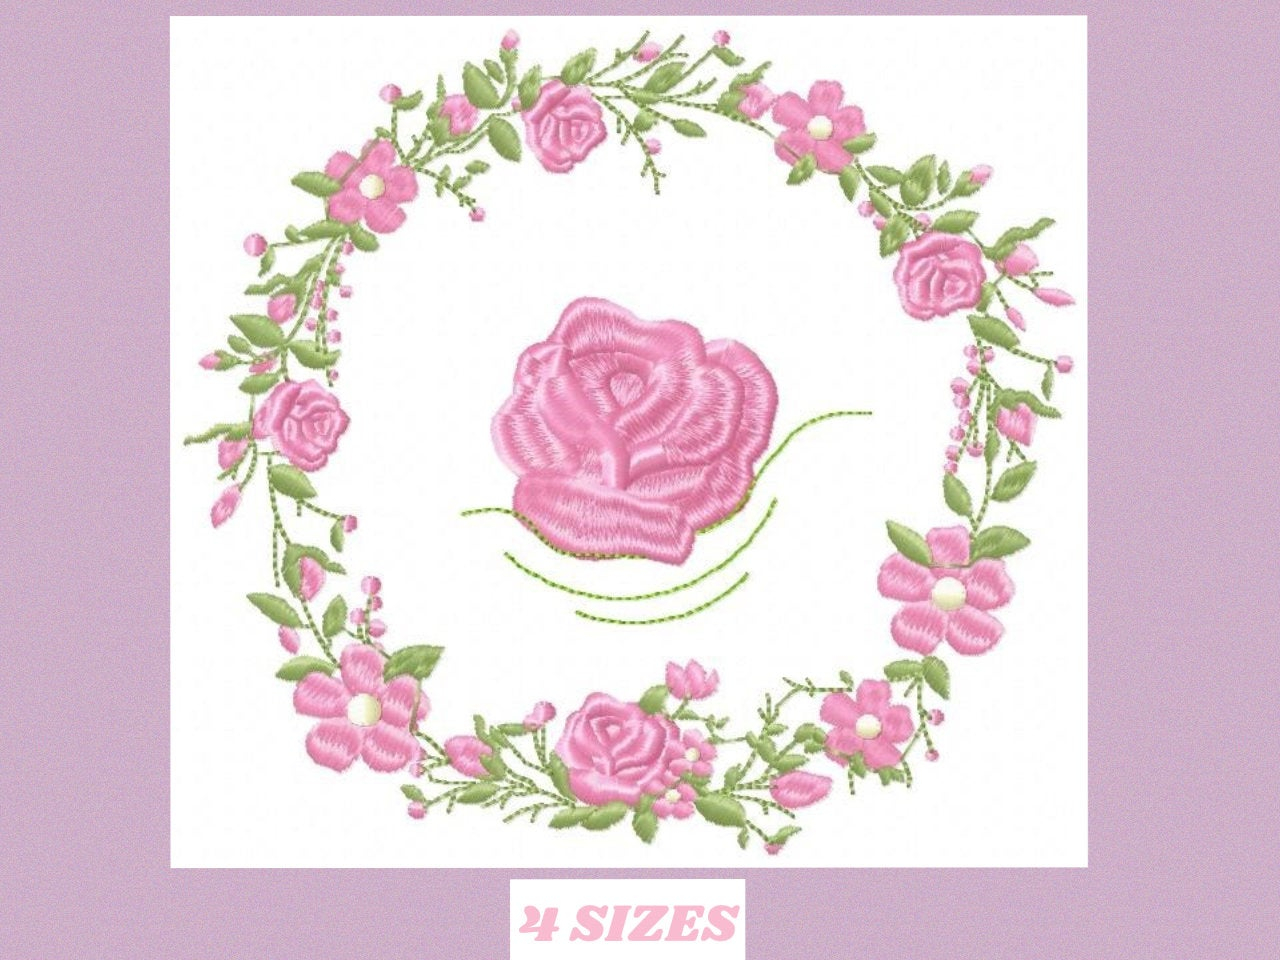 Rose Embroidery Pattern Frame Embroidery Designs Flower Embroidery Design Machine Embroidery Pattern Rose Embroidery File Girl Embroidery Roses Frame Design